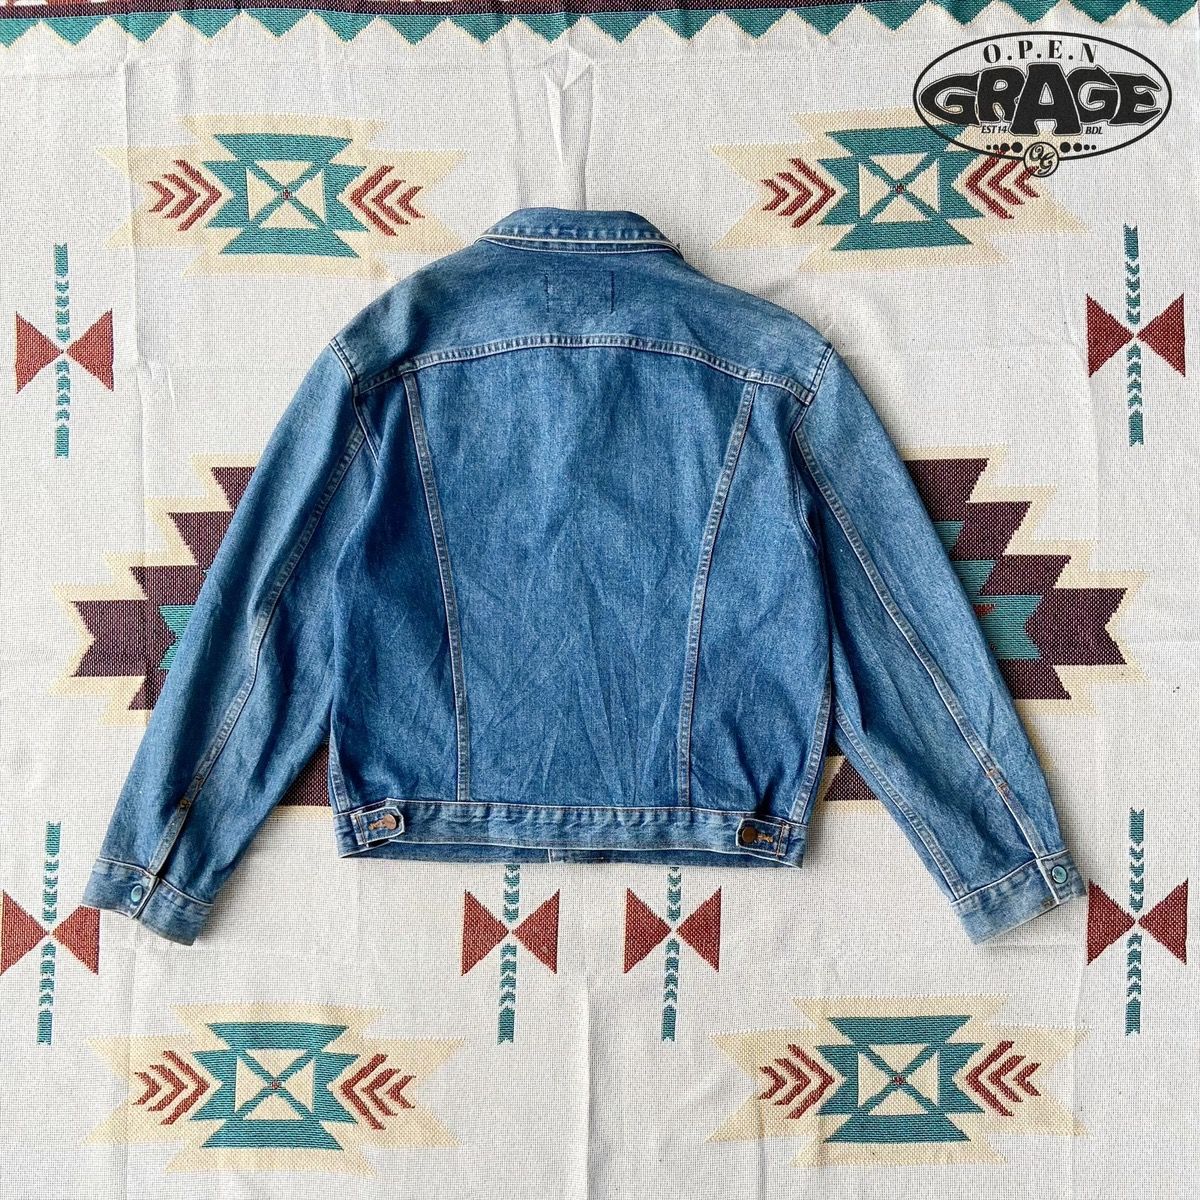 Archival Clothing - Collectible Classic VTG Wrangler Jean Jacket Worn by Icons - 12